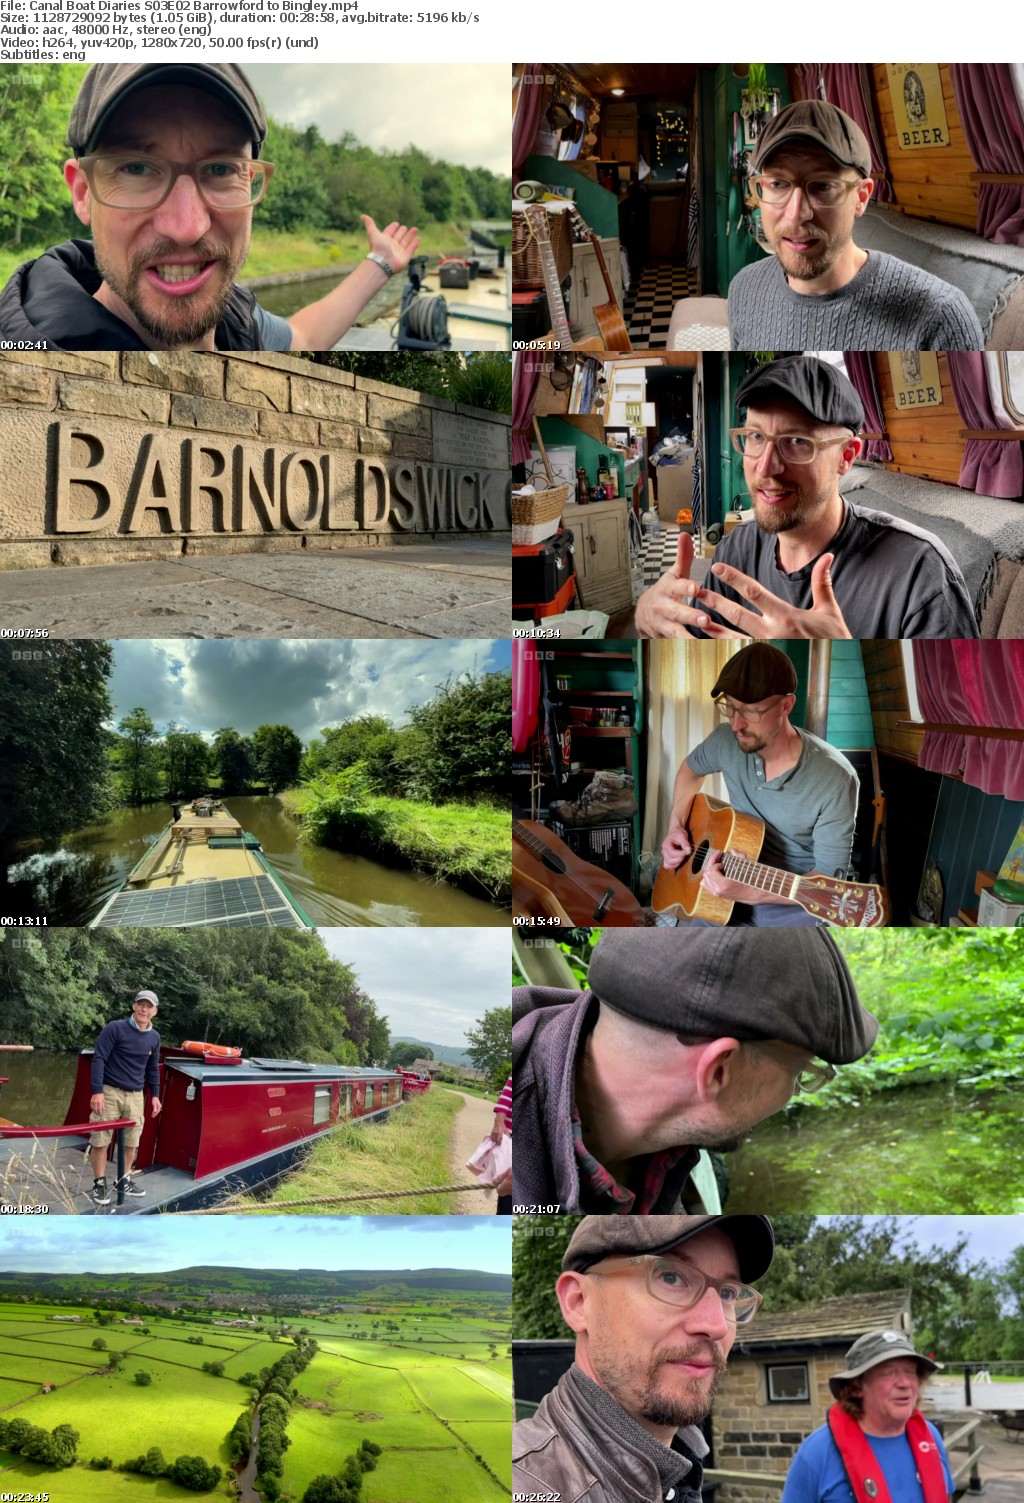 Canal Boat Diaries S03 complete (1280x720p HD, 50fps, soft Eng subs)